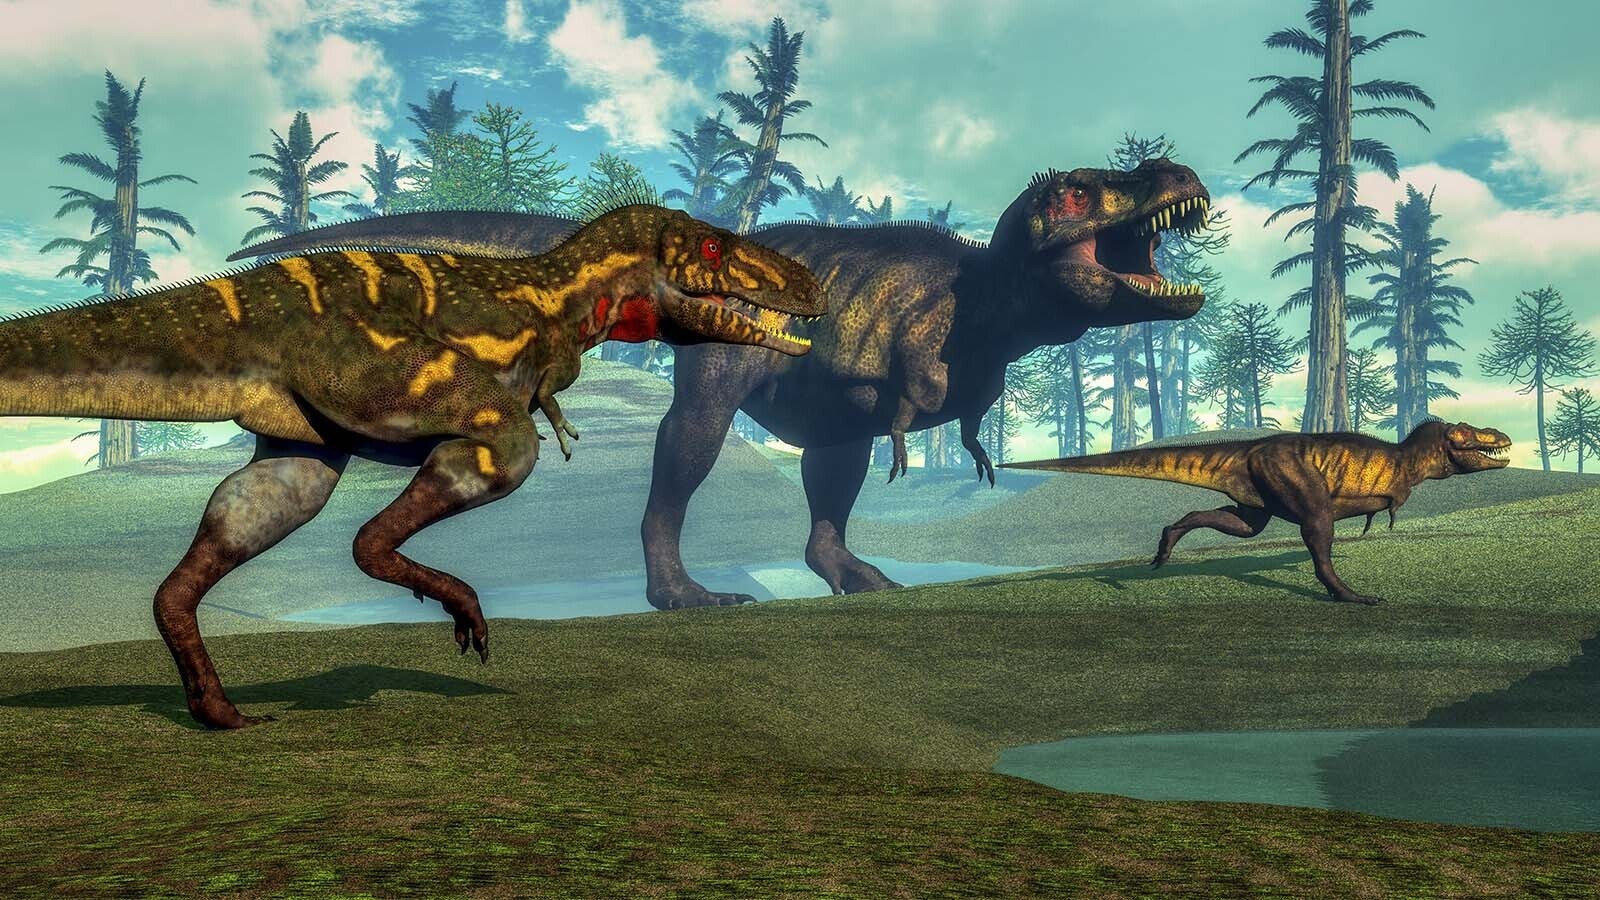 This illustration shows a scene depicting a Nanotyrannus, left, hunting a small Tyrannosaurus next to its parent, T. rex. There’s a hot debate now in scientific circles about whether Nanotyrannus is a juvenile T. rex or its own distinct species of dinosaur.